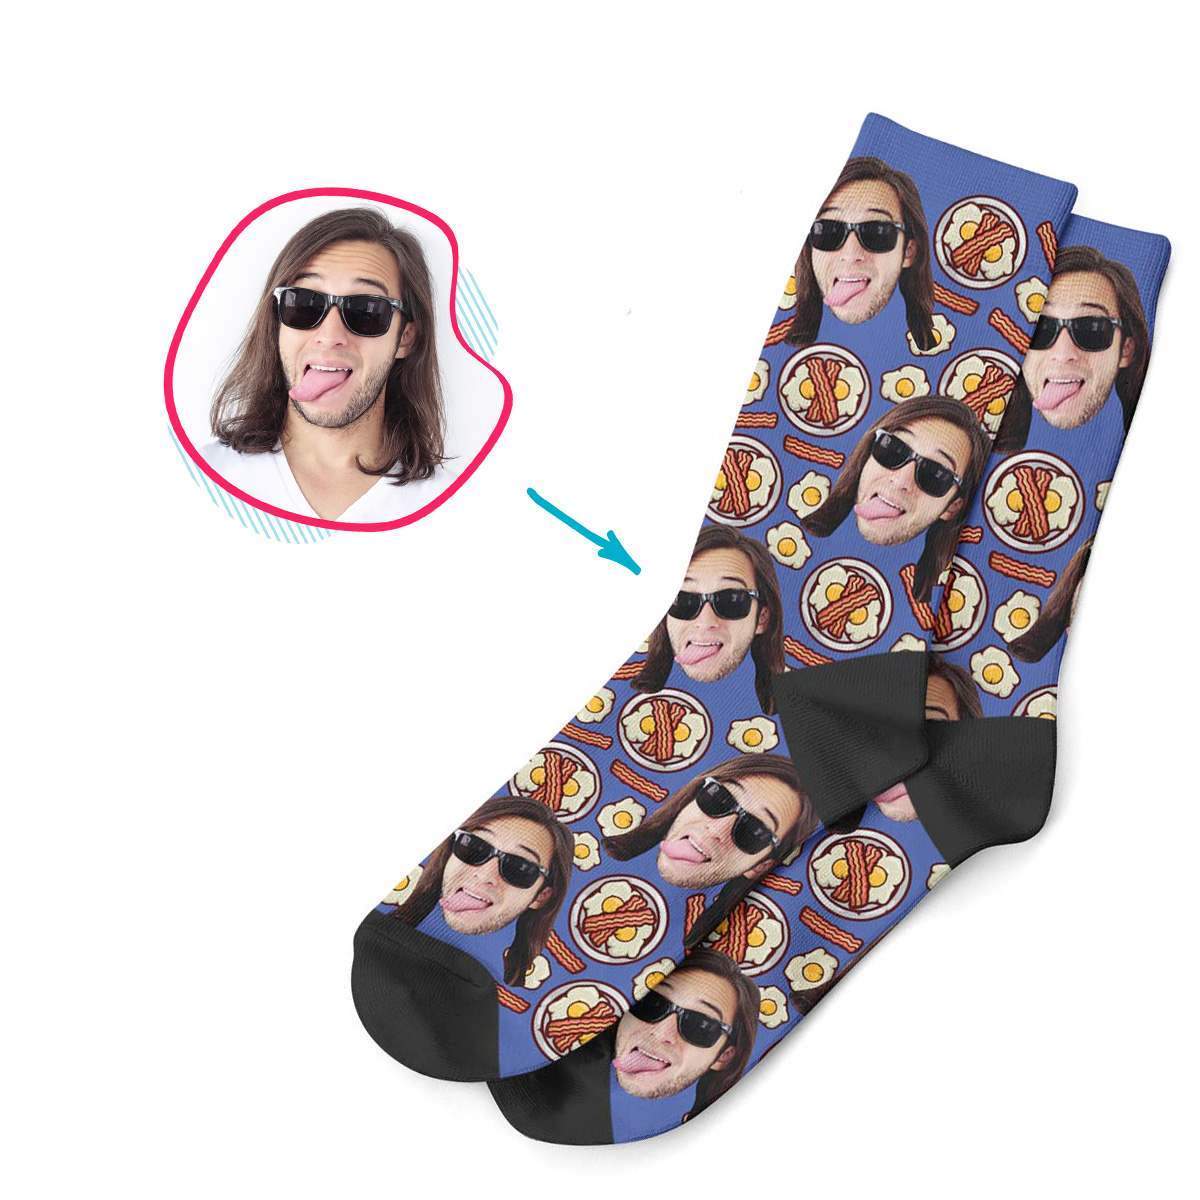 darkblue Bacon and Eggs socks personalized with photo of face printed on them